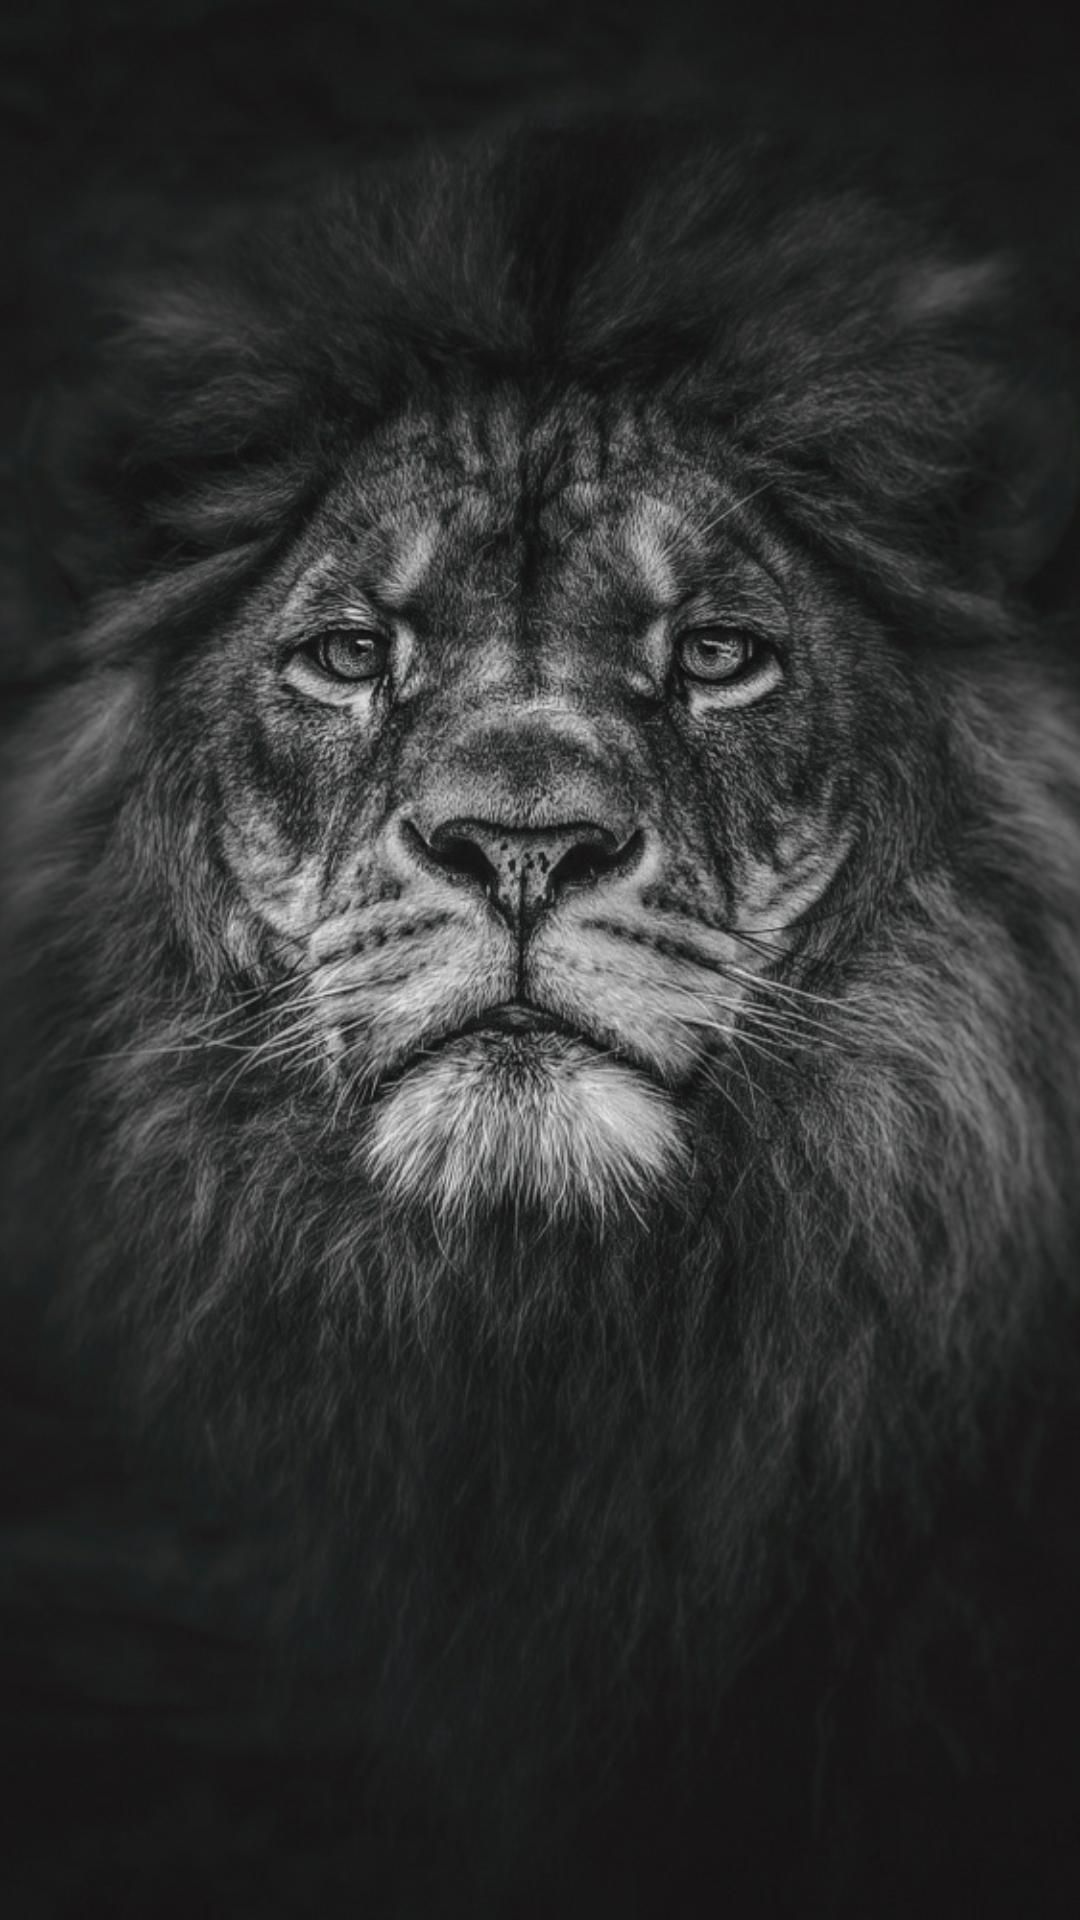 Black Lion Wallpaper HD Resolution Hupages Download iPhone Wallpaper. Lion wallpaper, World lion day, Lion picture